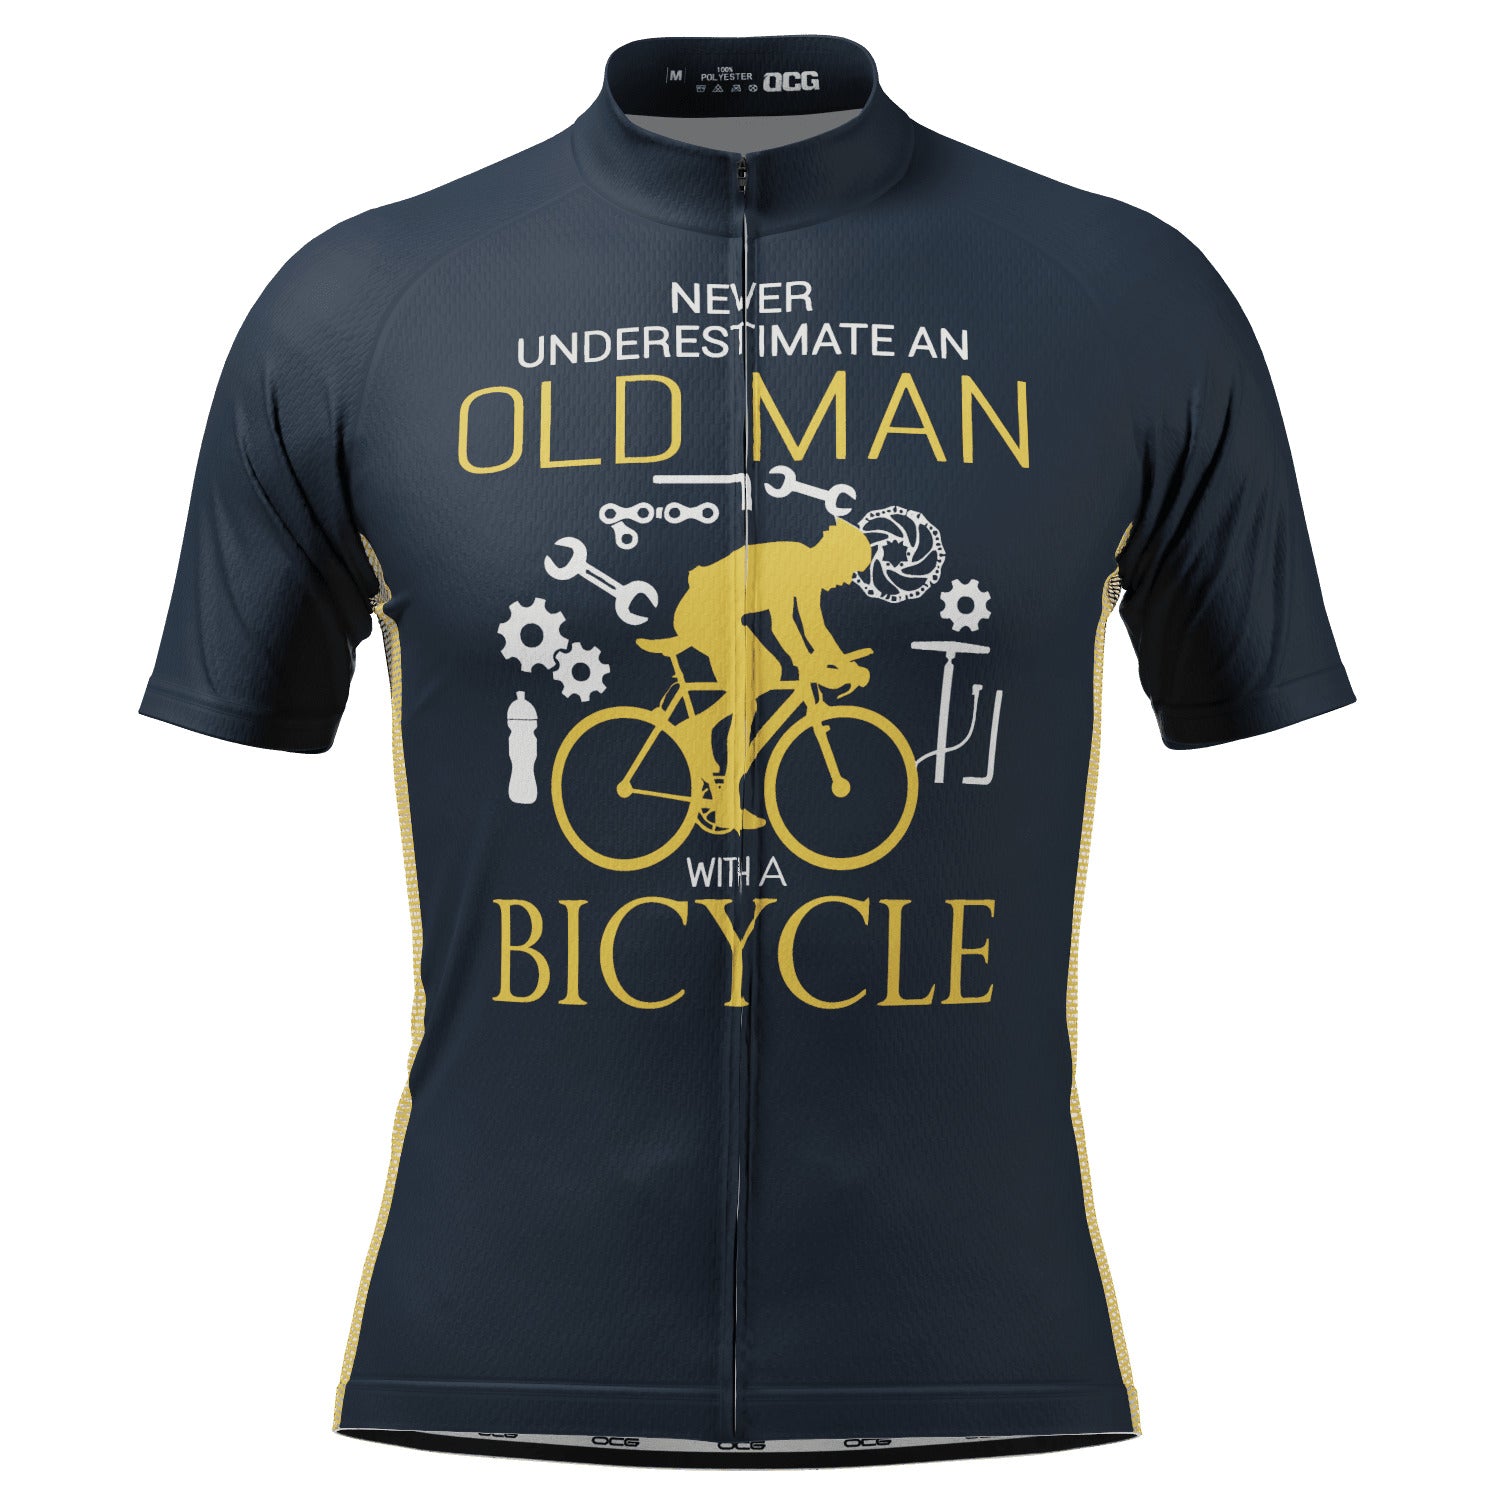 Men's Never Underestimate an Old Man Short Sleeve Cycling Jersey